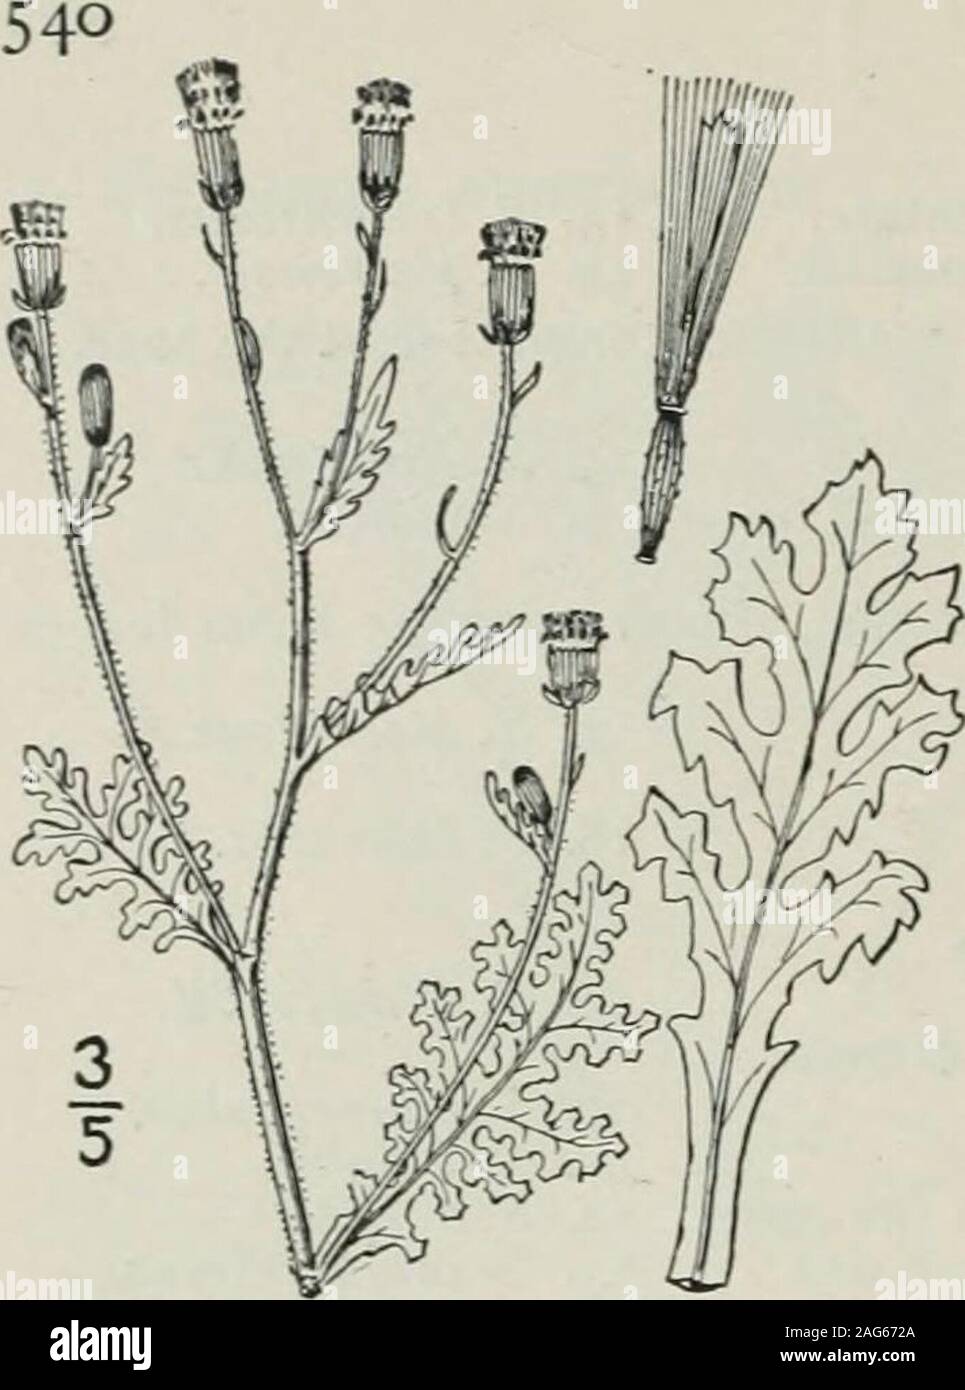 . An illustrated flora of the northern United States, Canada and the British possessions : from Newfoundland to the parallel of the southern boundary of Virginia and from the Atlantic Ocean westward to the 102nd meridian. 2. Senecio sylvaticus L. ood Groundsel.Fig. 4611. Senecio sylvaticus L. Sp. PI. 868. 1753. Annual, glabrous or puberulent; stem usually much branch-ed. i°-2i° high, leafy. Leaves pinnatifid, oblong or lanceo-late in outline, the segments oblong or spatulate, obtuse,dentate, lobed or entire, or the uppermost leaves linear andmerely dentate; heads several or numerous in the c Stock Photo